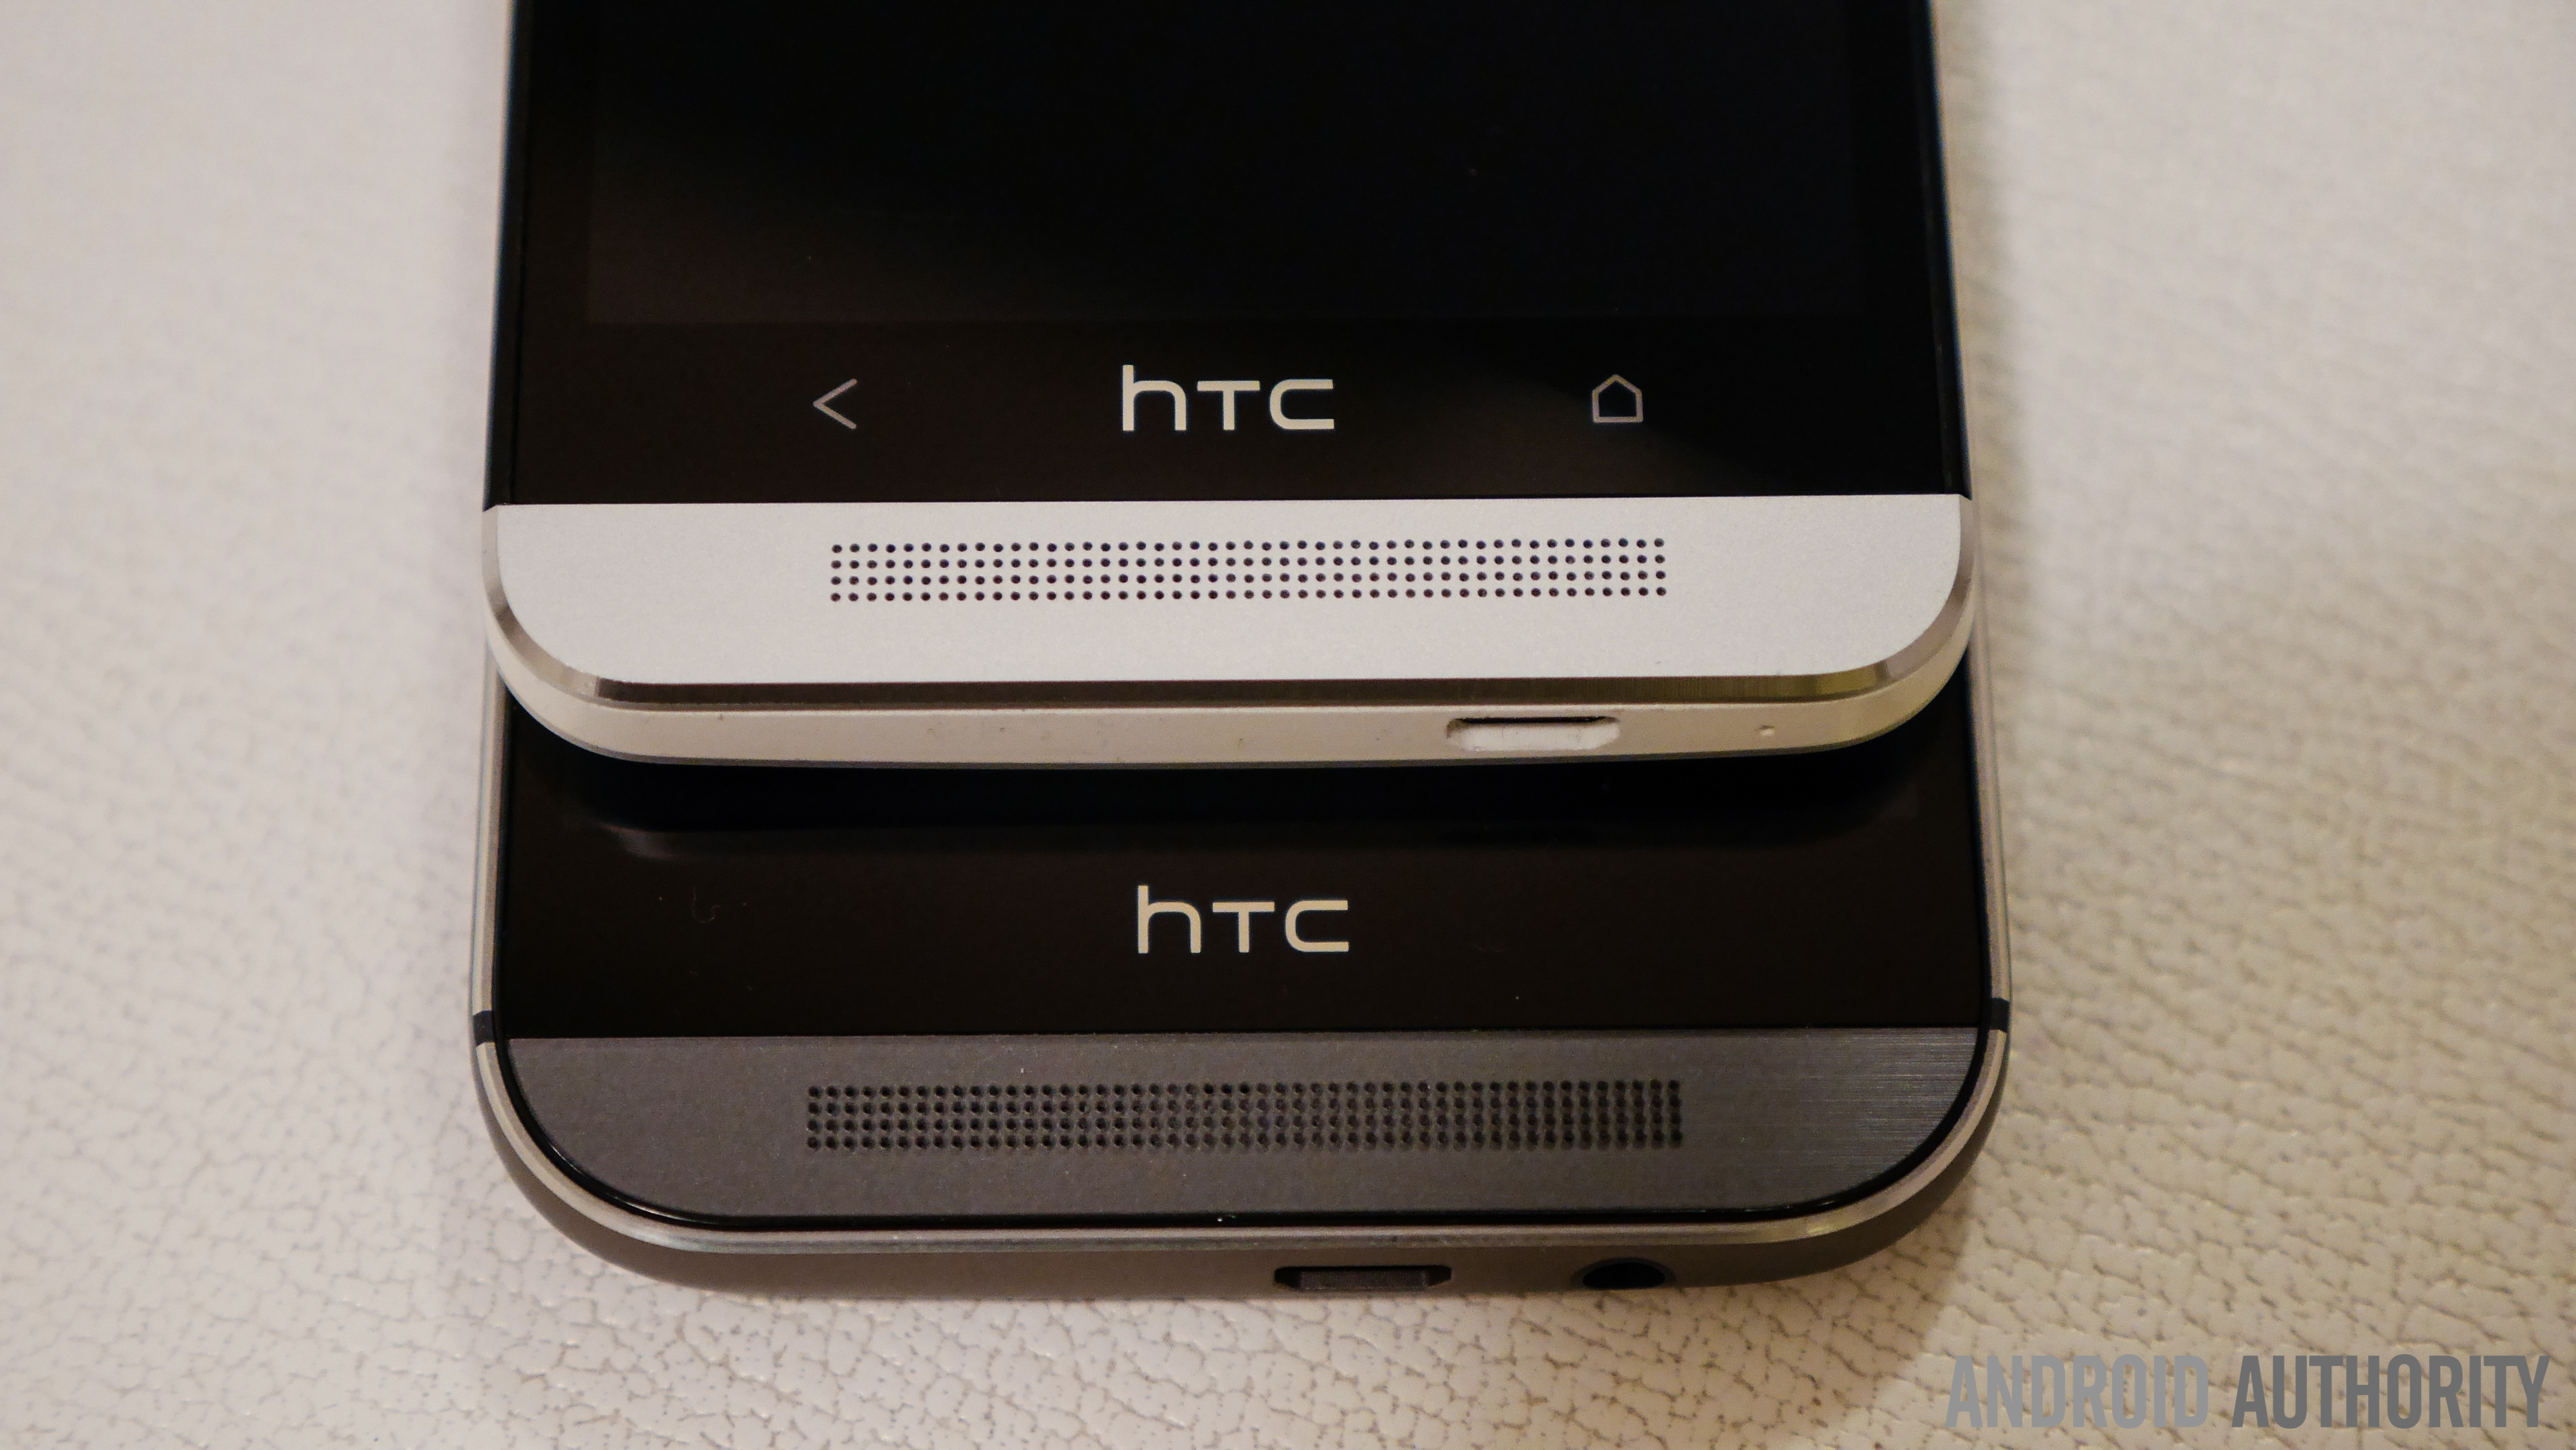 htc one m8 vs htc one m7 quick look aa (6 of 19)